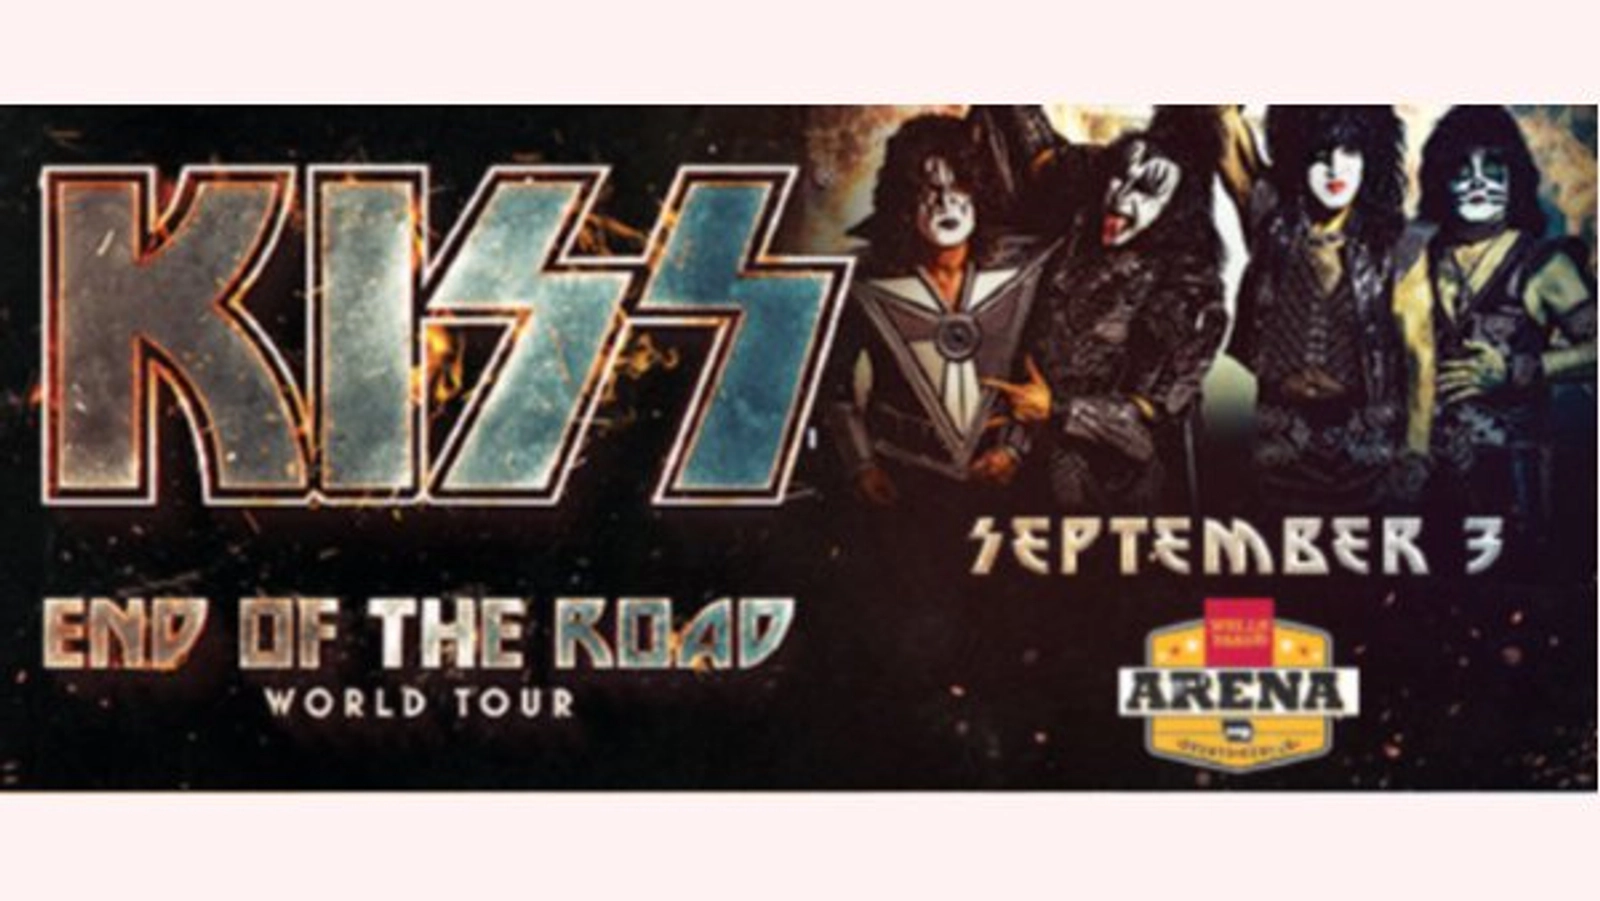 Show Us Your LAST KISS for Last Chance KISS TICKETS! - Thumbnail Image